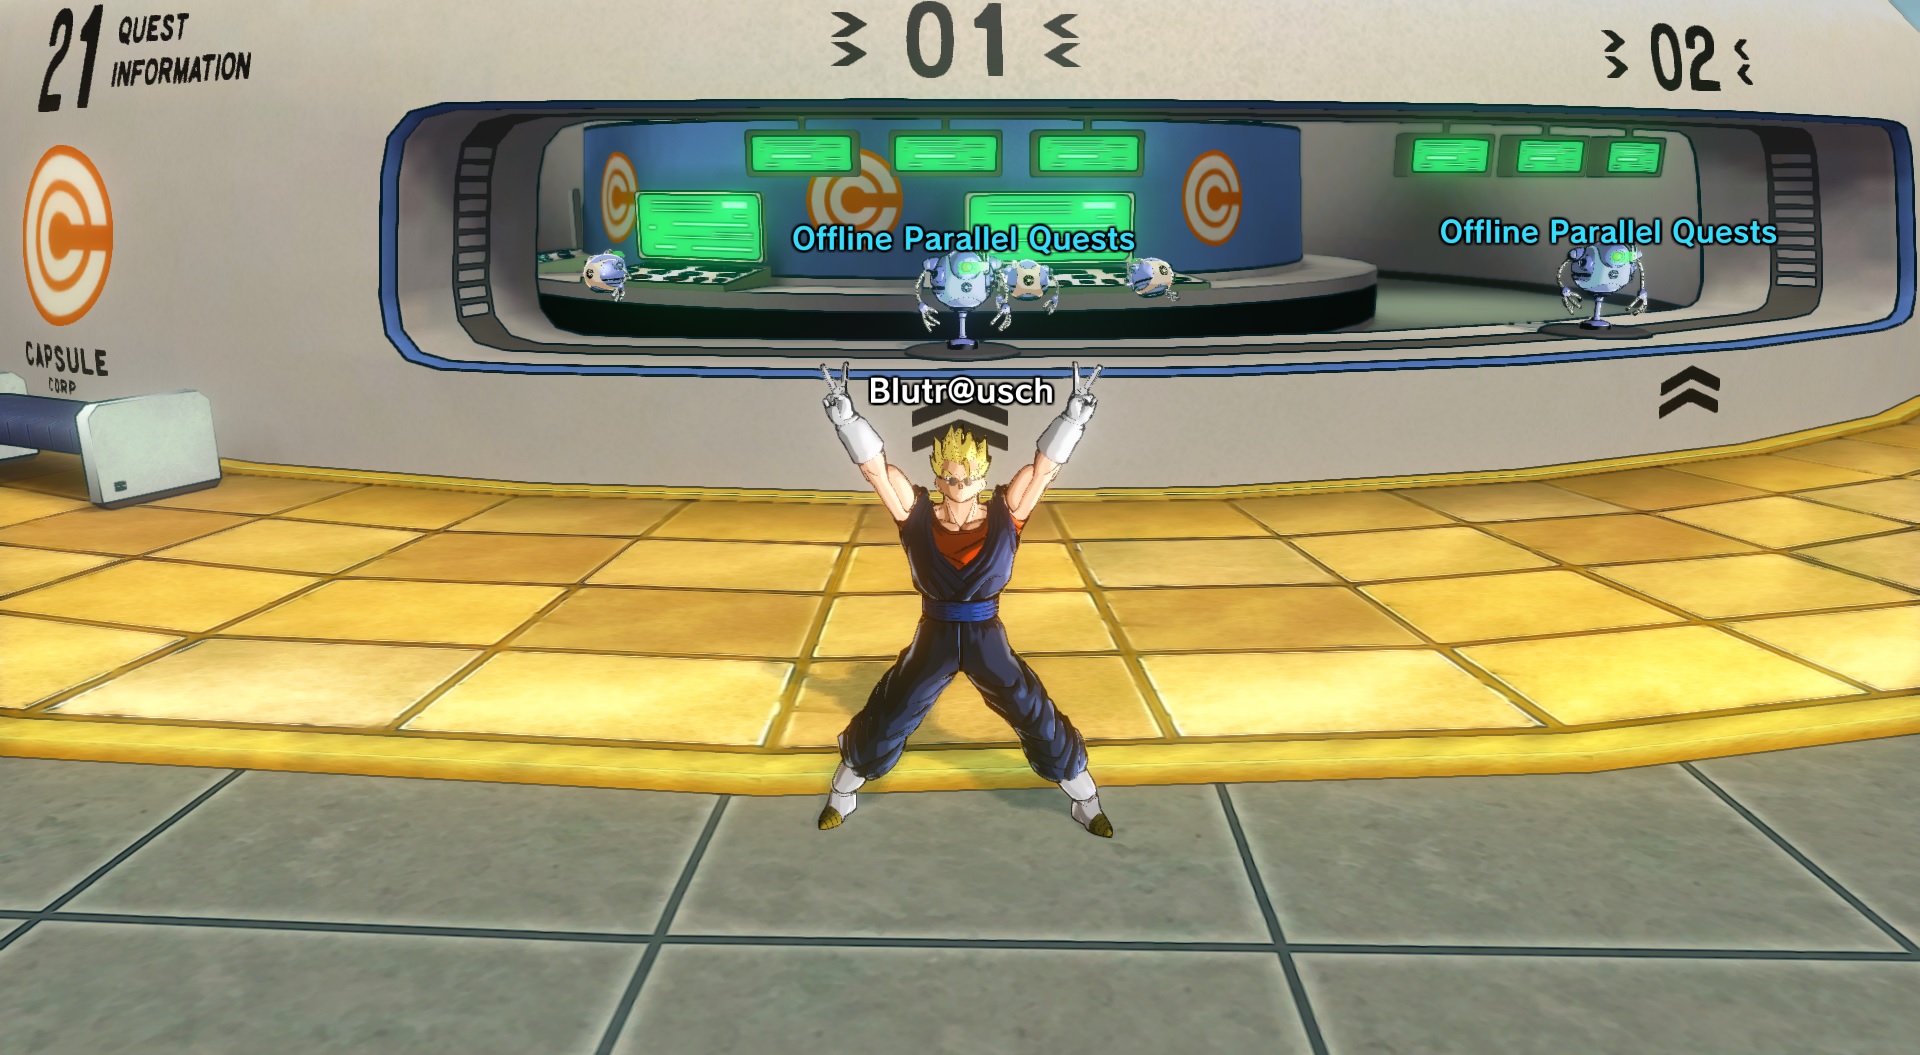 Steam Community :: Guide :: Parallel Quest's Time Patroller Locations in Dragon  Ball: Xenoverse